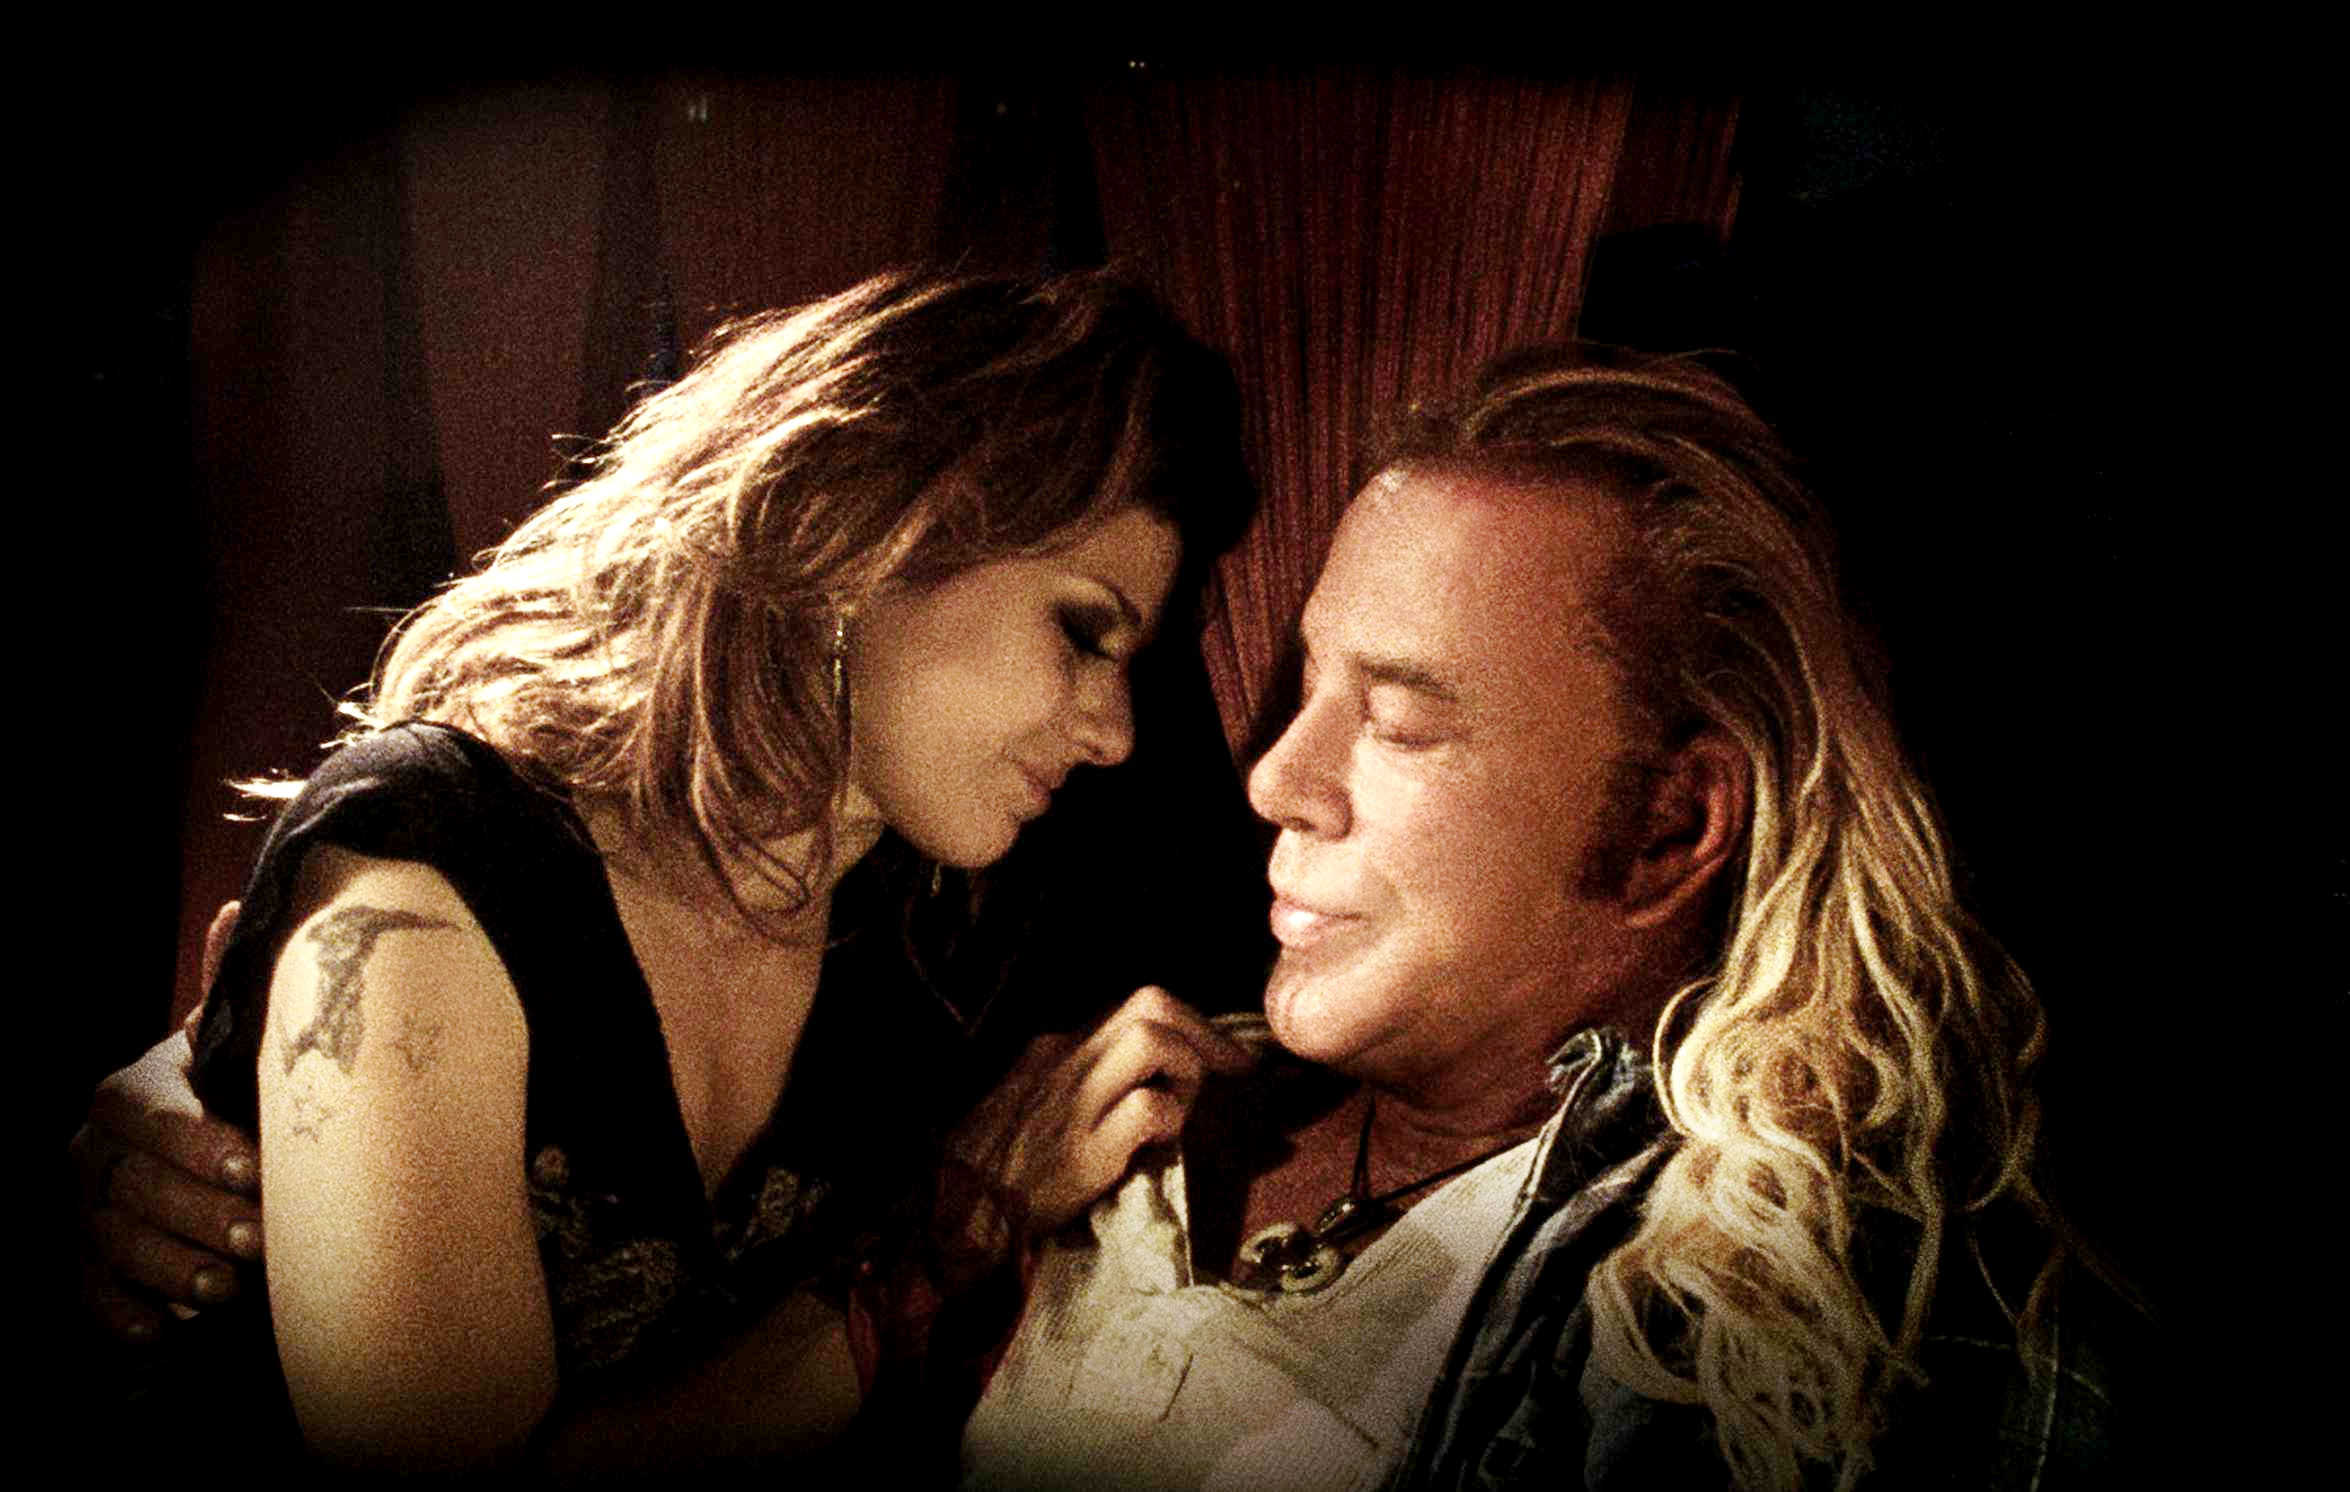 Marisa Tomei stars as Cassidy and Mickey Rourke stars as Randy 'The Ram' Robinson in Fox Searchlight Pictures' The Wrestler (2008). Photo credit by Niko Tavernise.